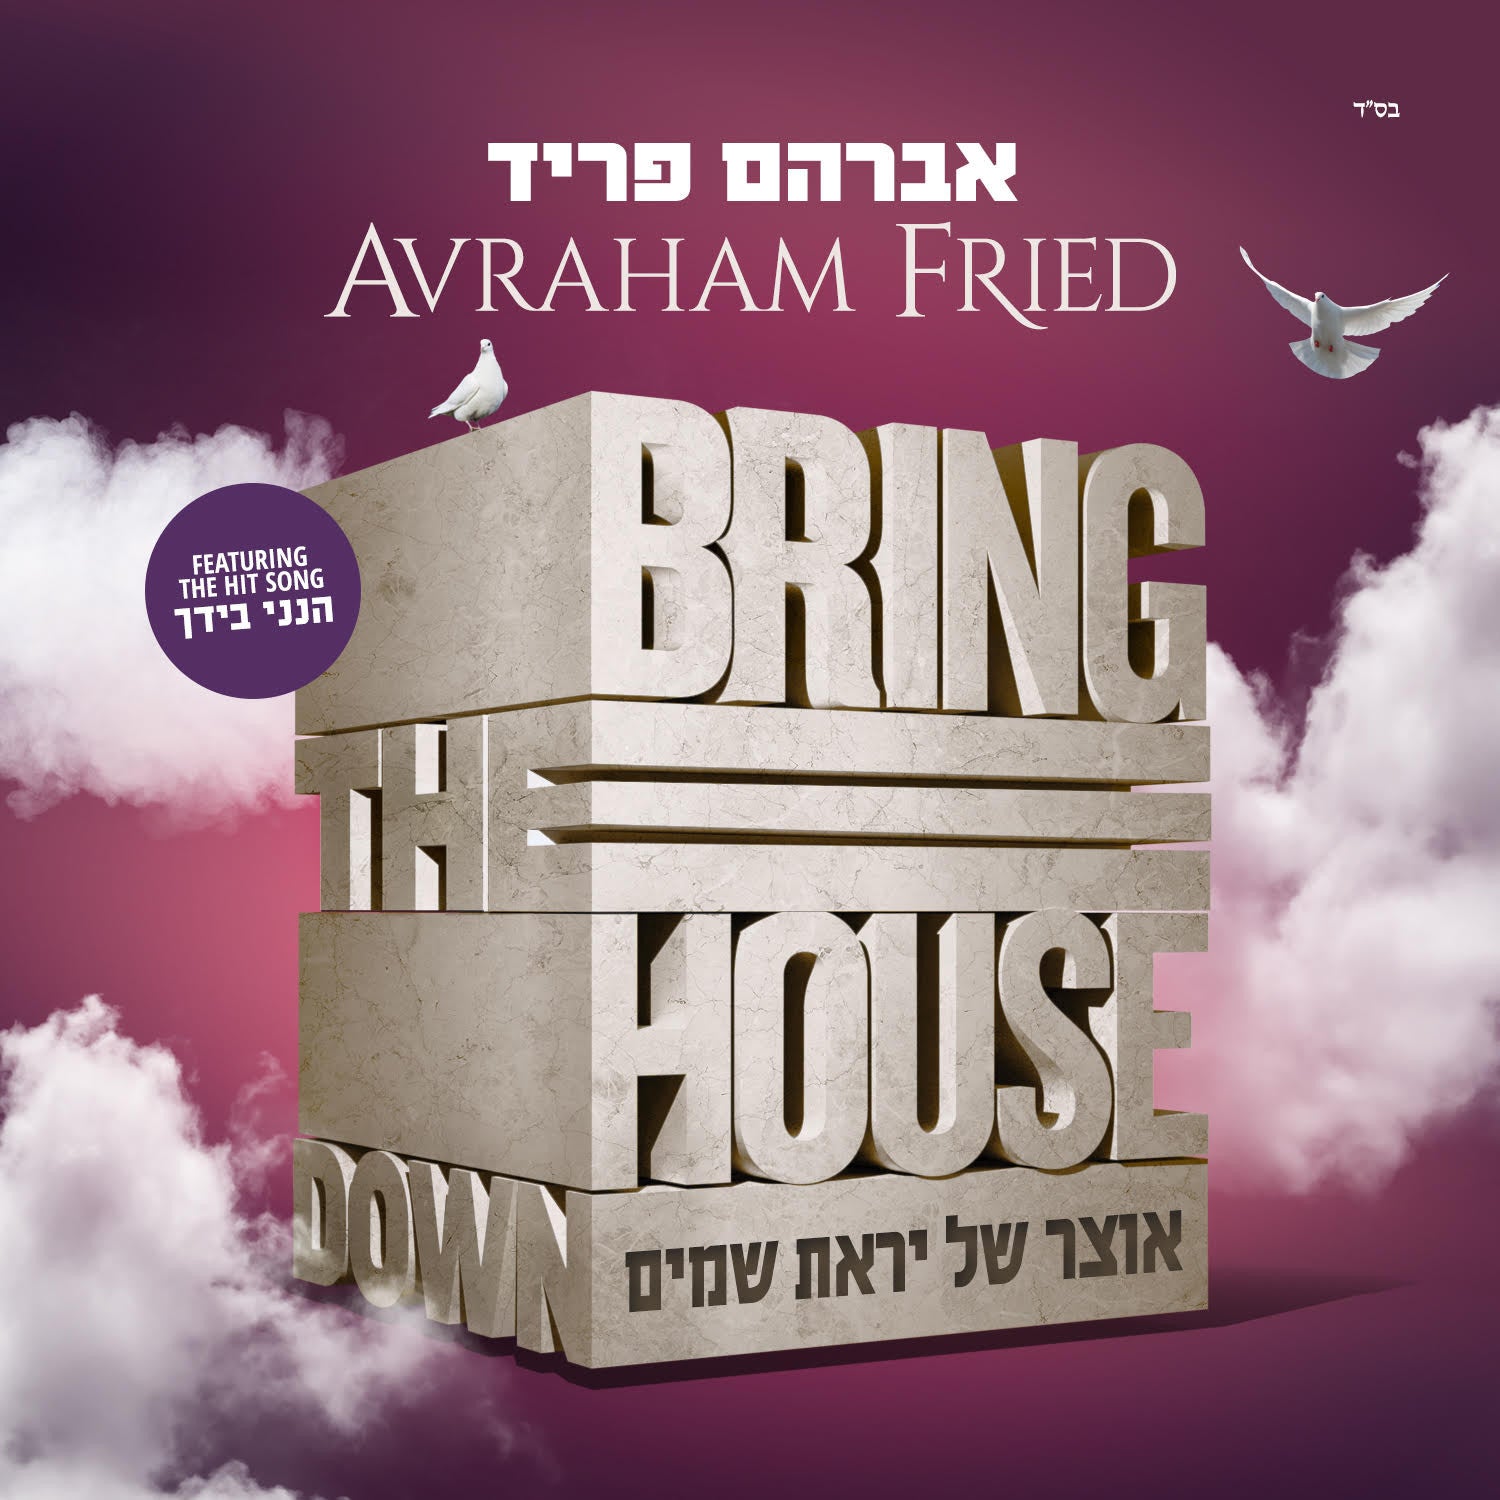 Avraham Fried - Bring The House Down